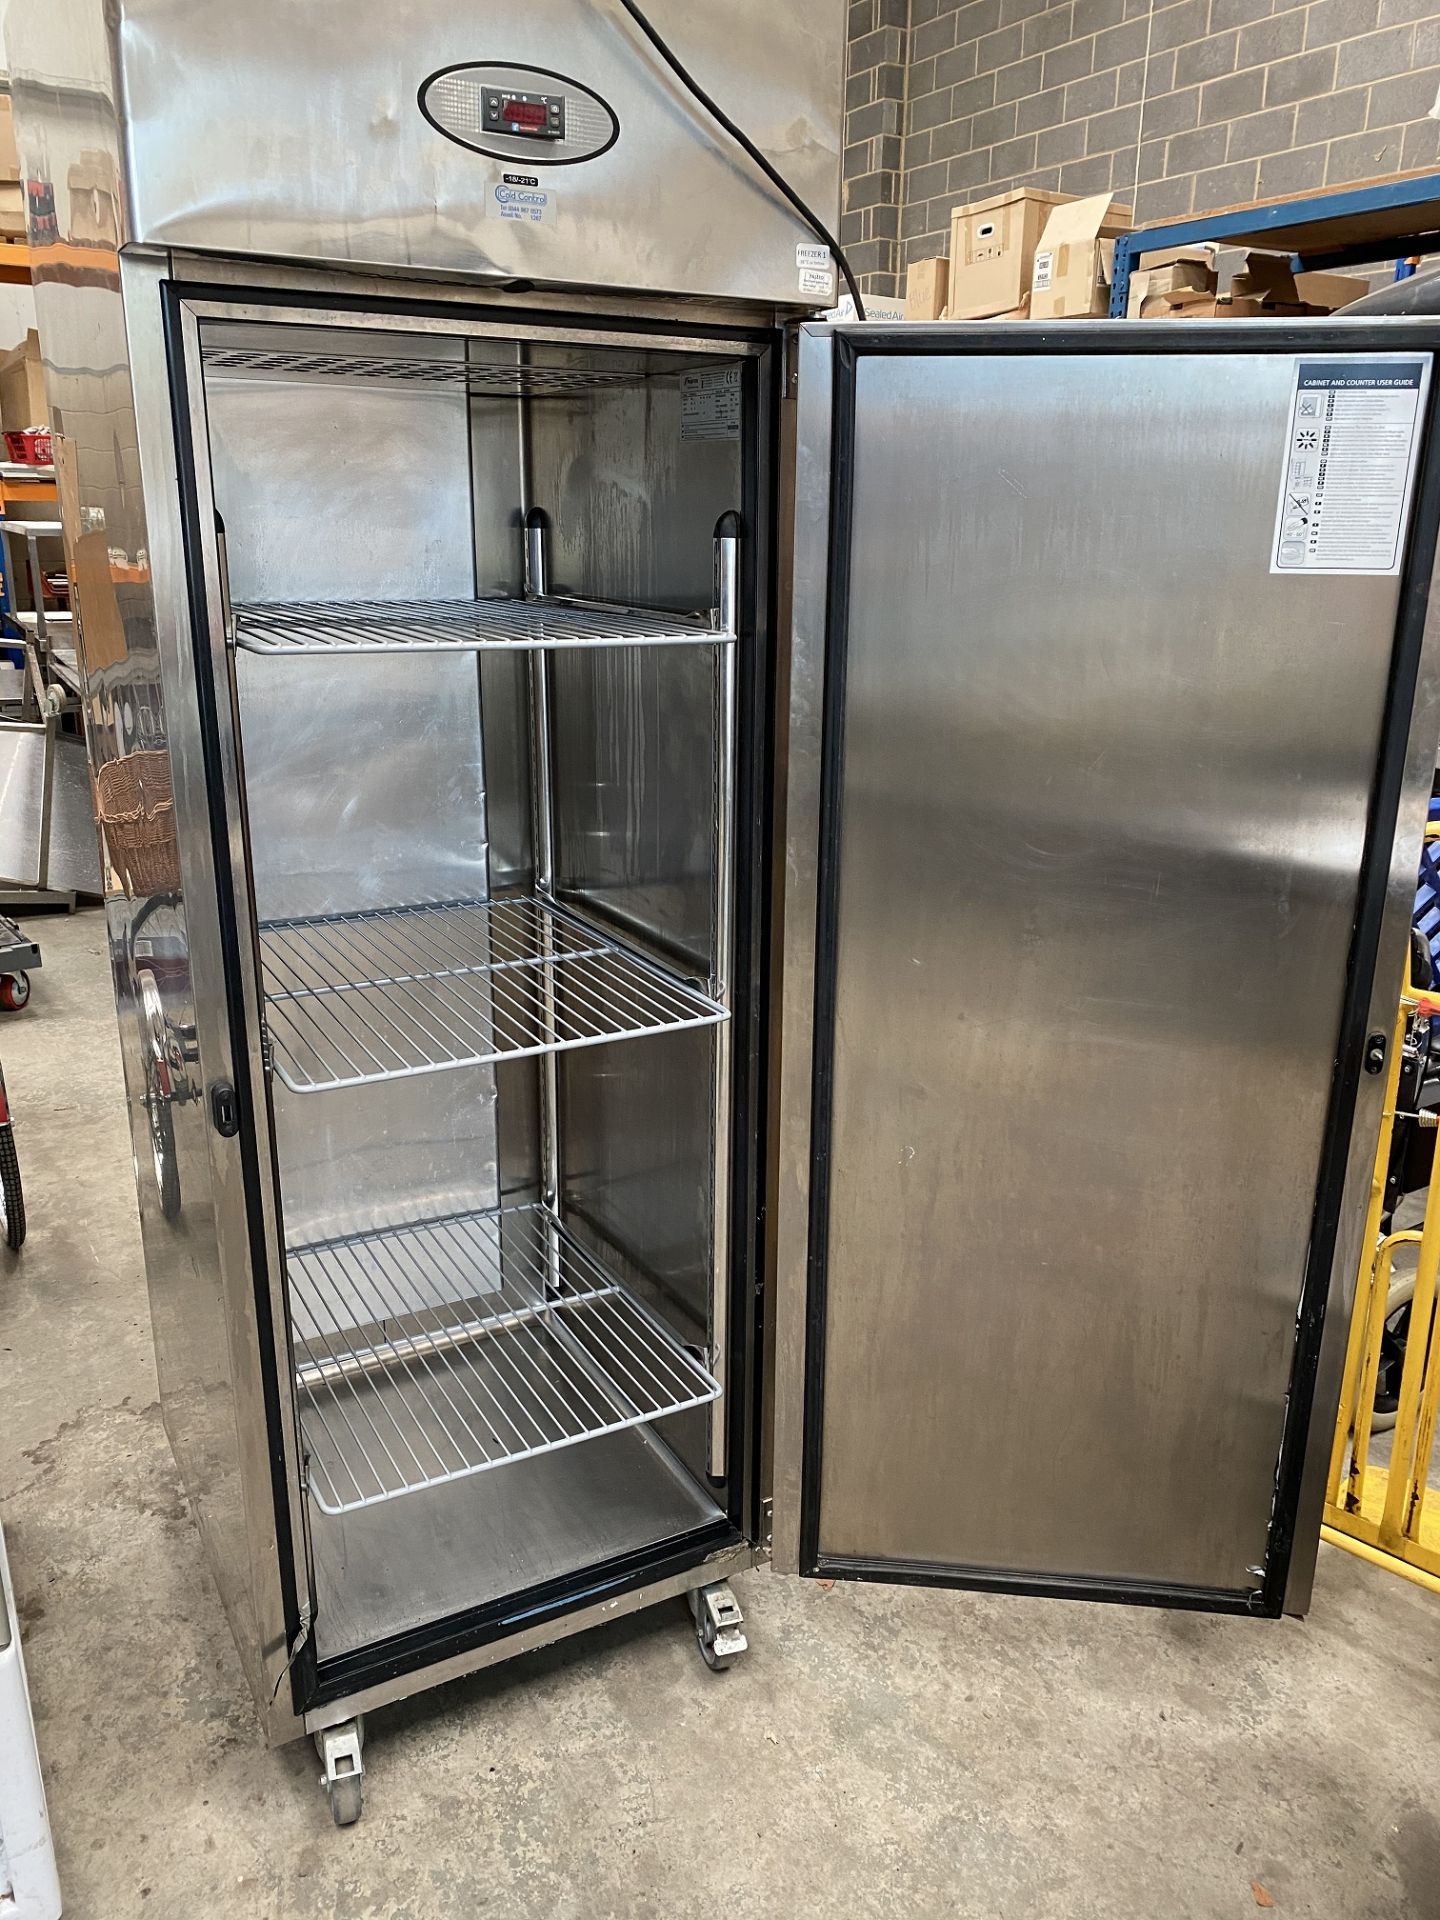 Foster Stainless Steel Upright Freezer - Image 2 of 2